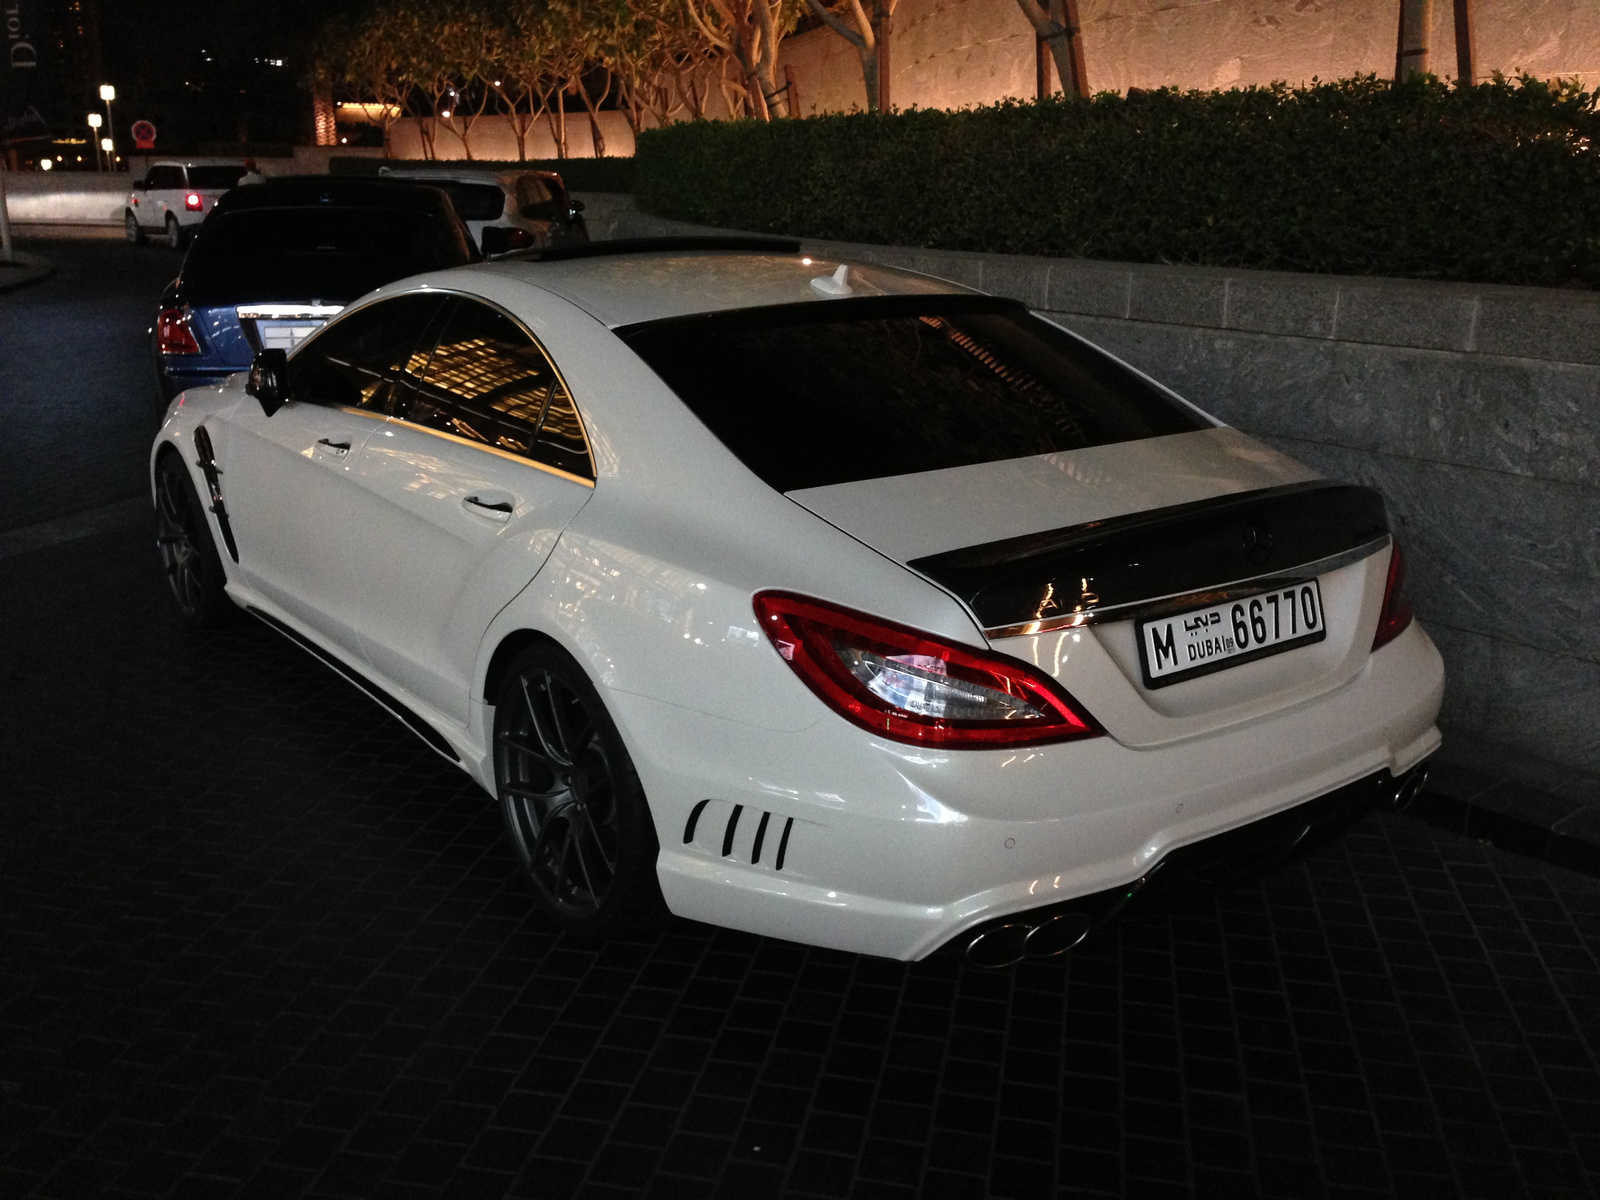 Mercedes-Benz CLS 63 AMG (Locally Modified)